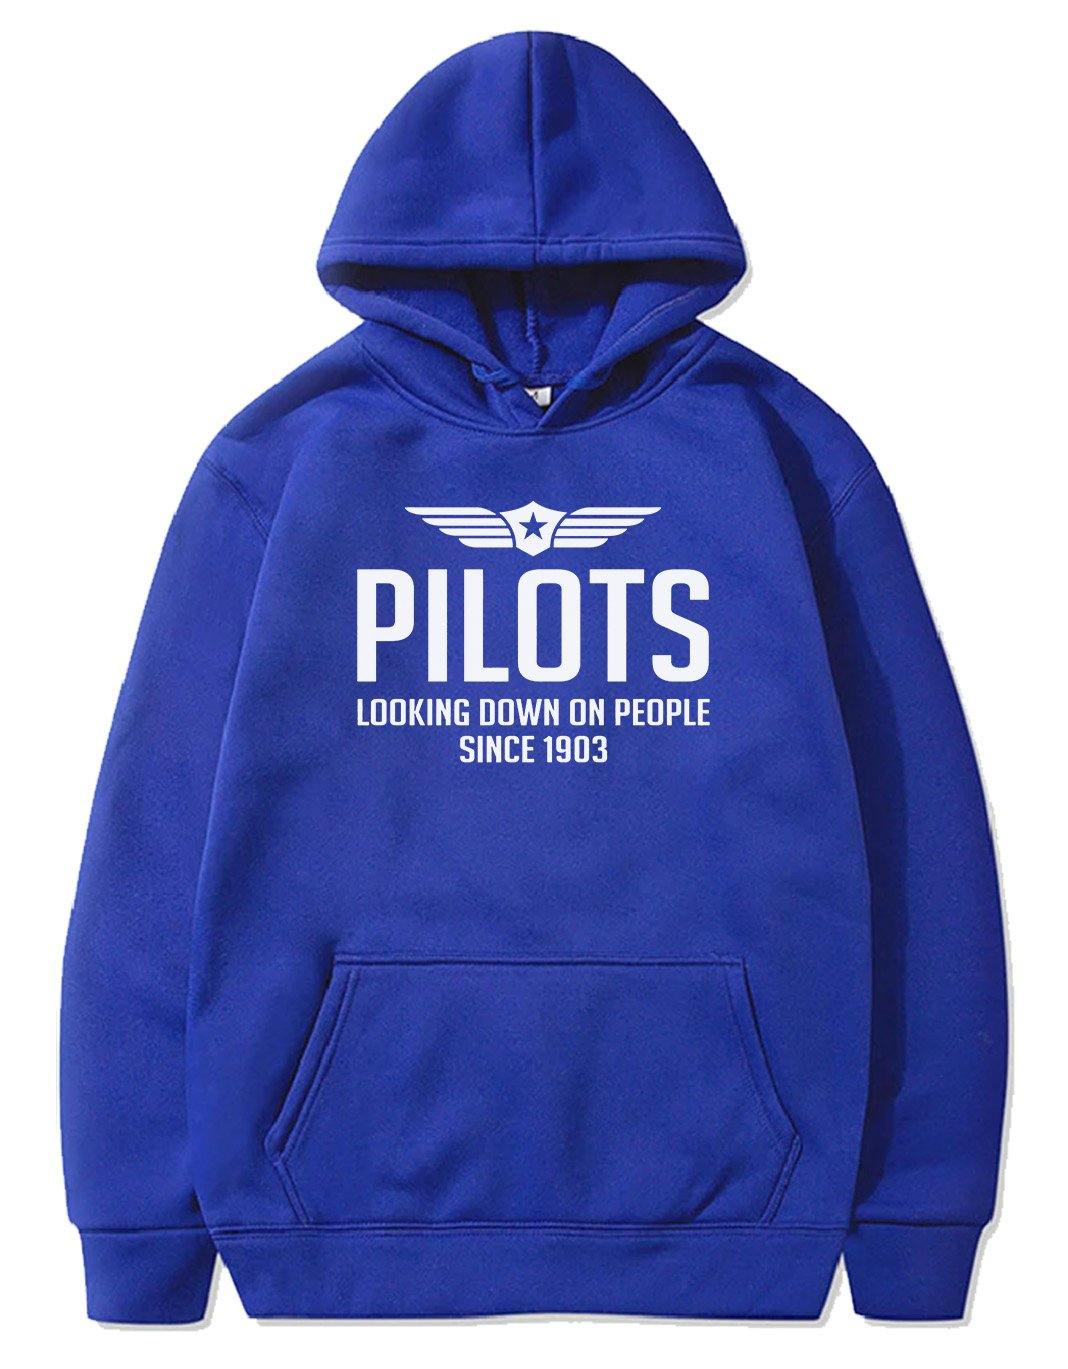 PILOTS LOOKING DOWN ON PEOPLE SINCE 1903  PULLOVER THE AV8R